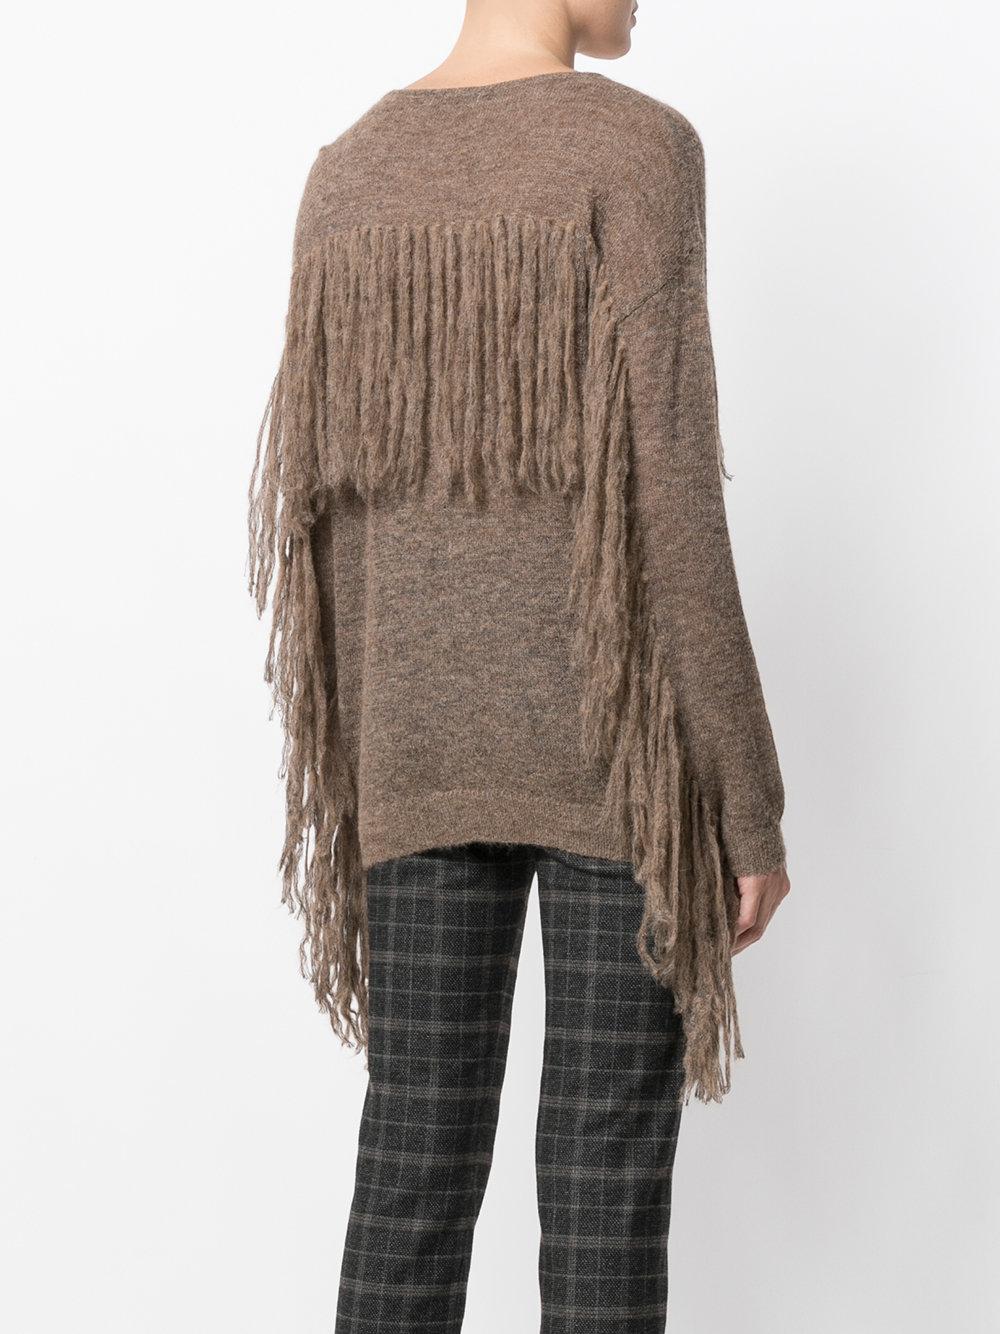 Mes demoiselles Fringed Fitted Sweater in Brown | Lyst